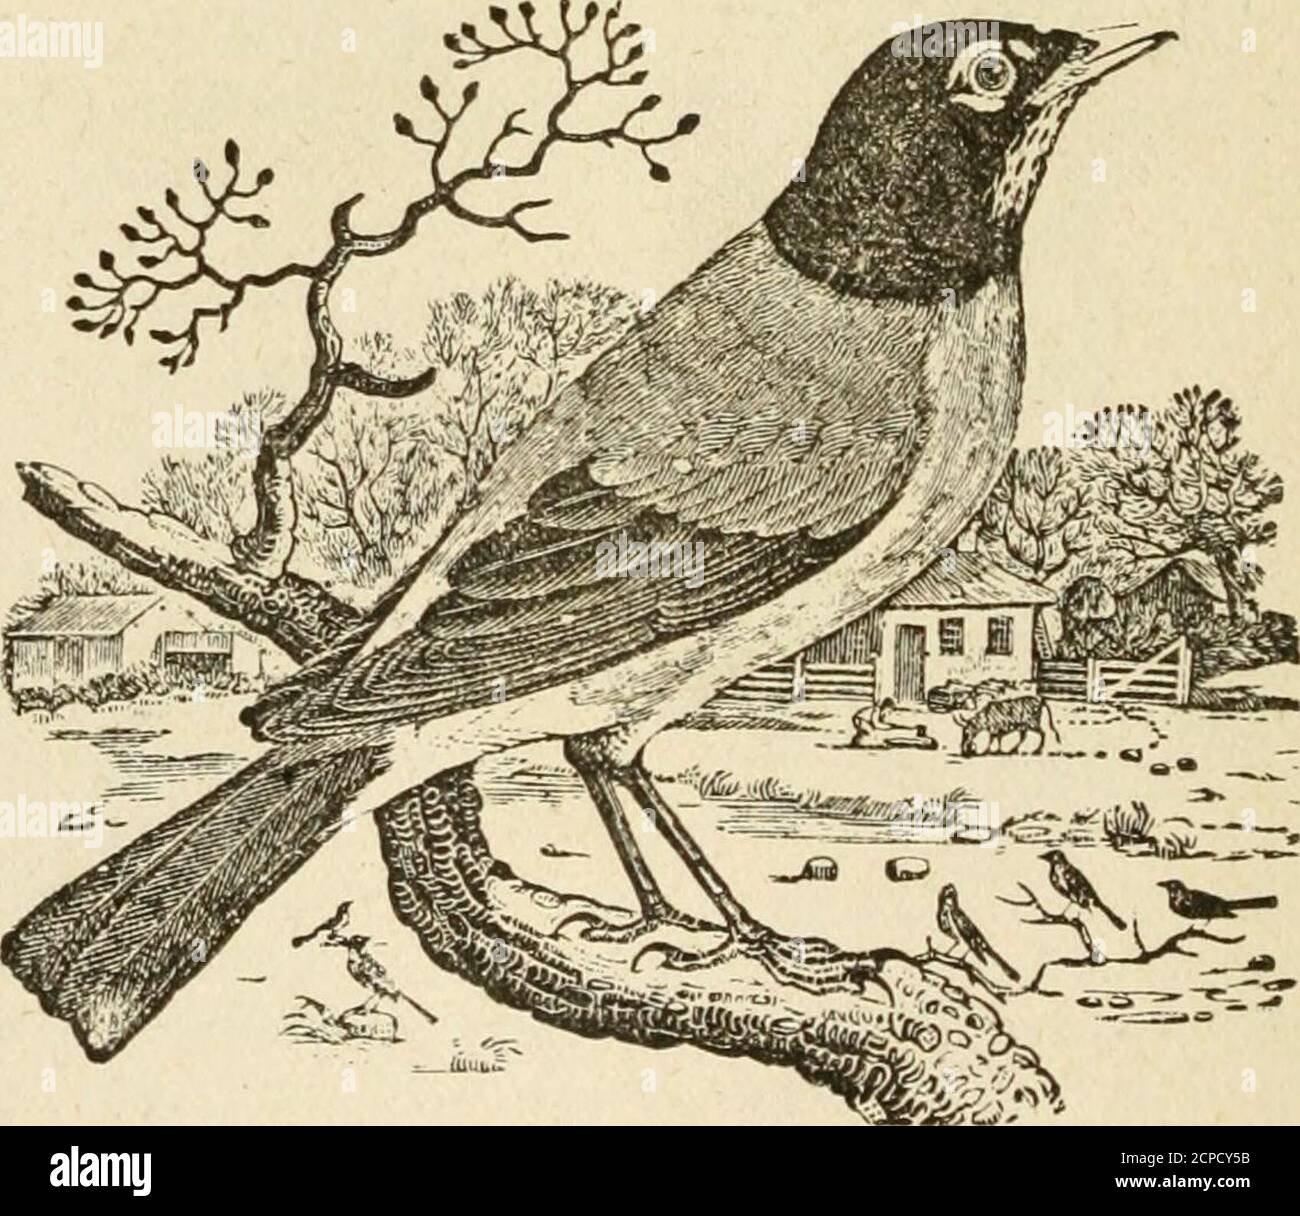 . The history of birds : their varieties and oddities, comprising graphic descriptions of nearly all known species of birds, with fishes and insects, the world over, and illustrating their varied habits, modes of life, and distinguishing peculiarities by means of delightful anecdotes and spirited engravings . for sup-poit daring the inclemency of winter. In like manner the commonFieldfare migrates at a late season from the northern districts ofSiberia and Lapland to pass the winter in the milder parts of Europe.The Robin has no fixed time for migration, nor any particularrendezvous; they retir Stock Photo